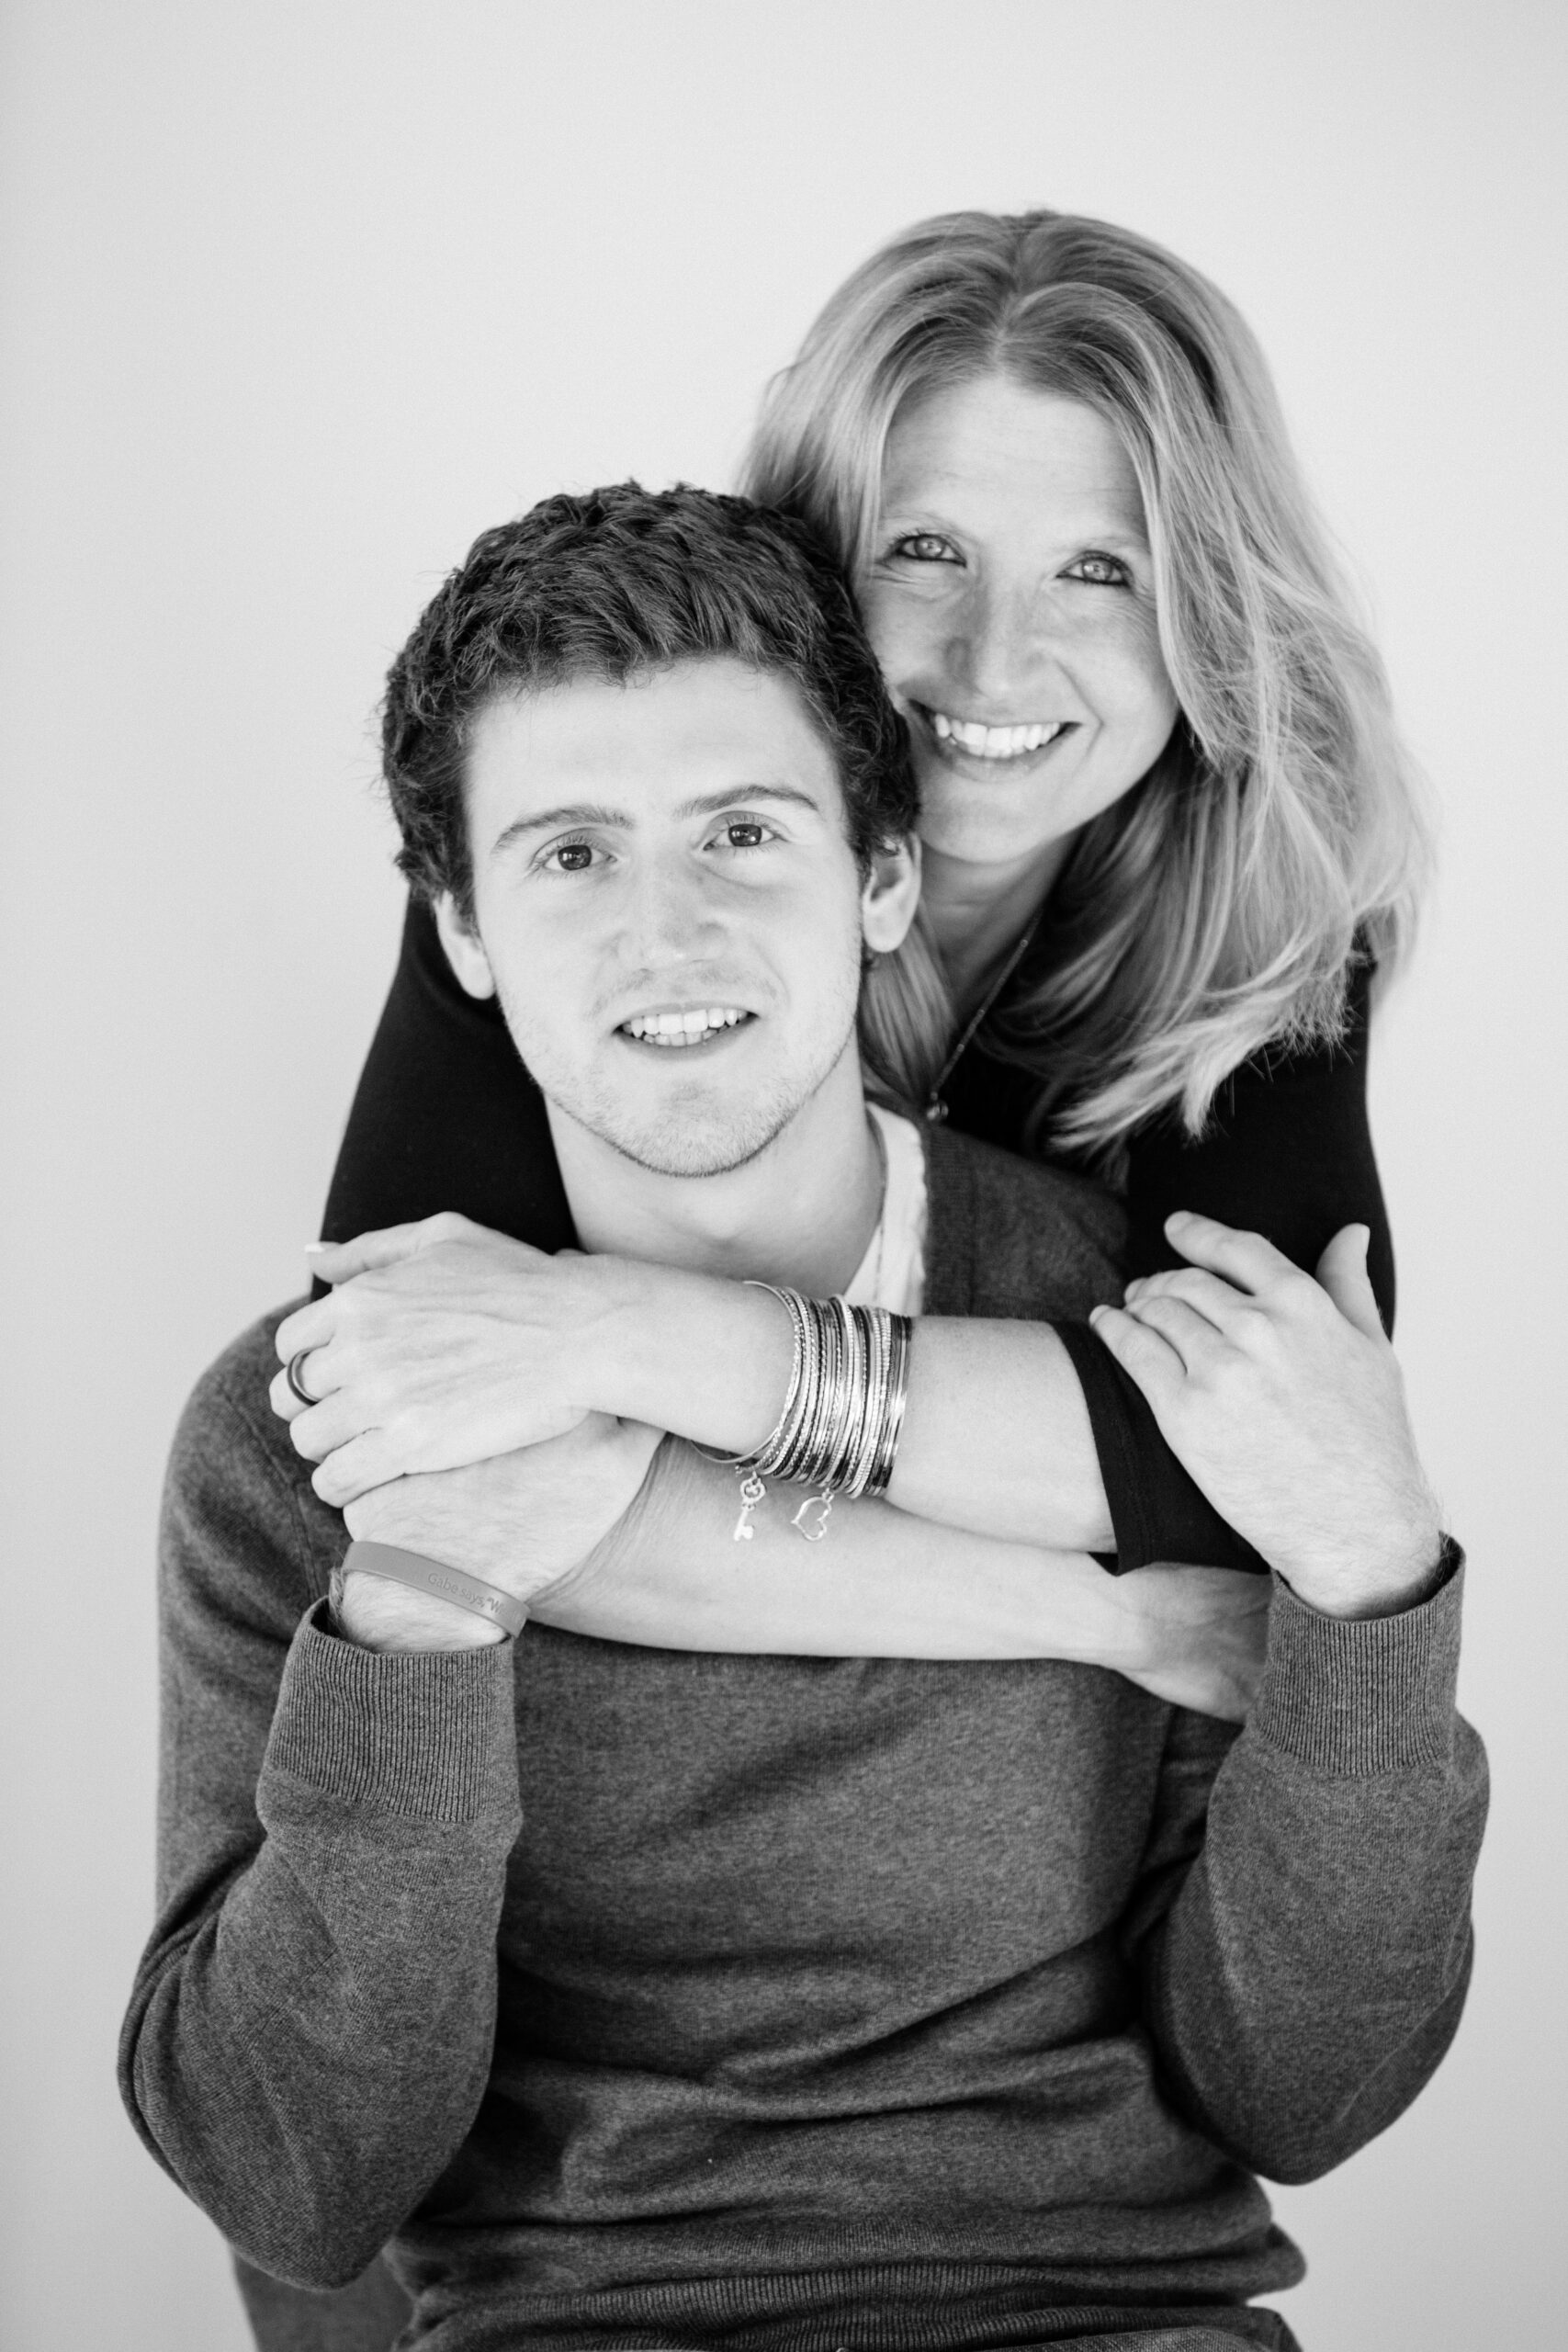  Leesburg, Virginia, photography studio, 20175, 20176, photography, Alimond photography studio, family portrait, mother and son, love, women's black shirt, family photography, family photography session, hug, black and white, black and white photo, b